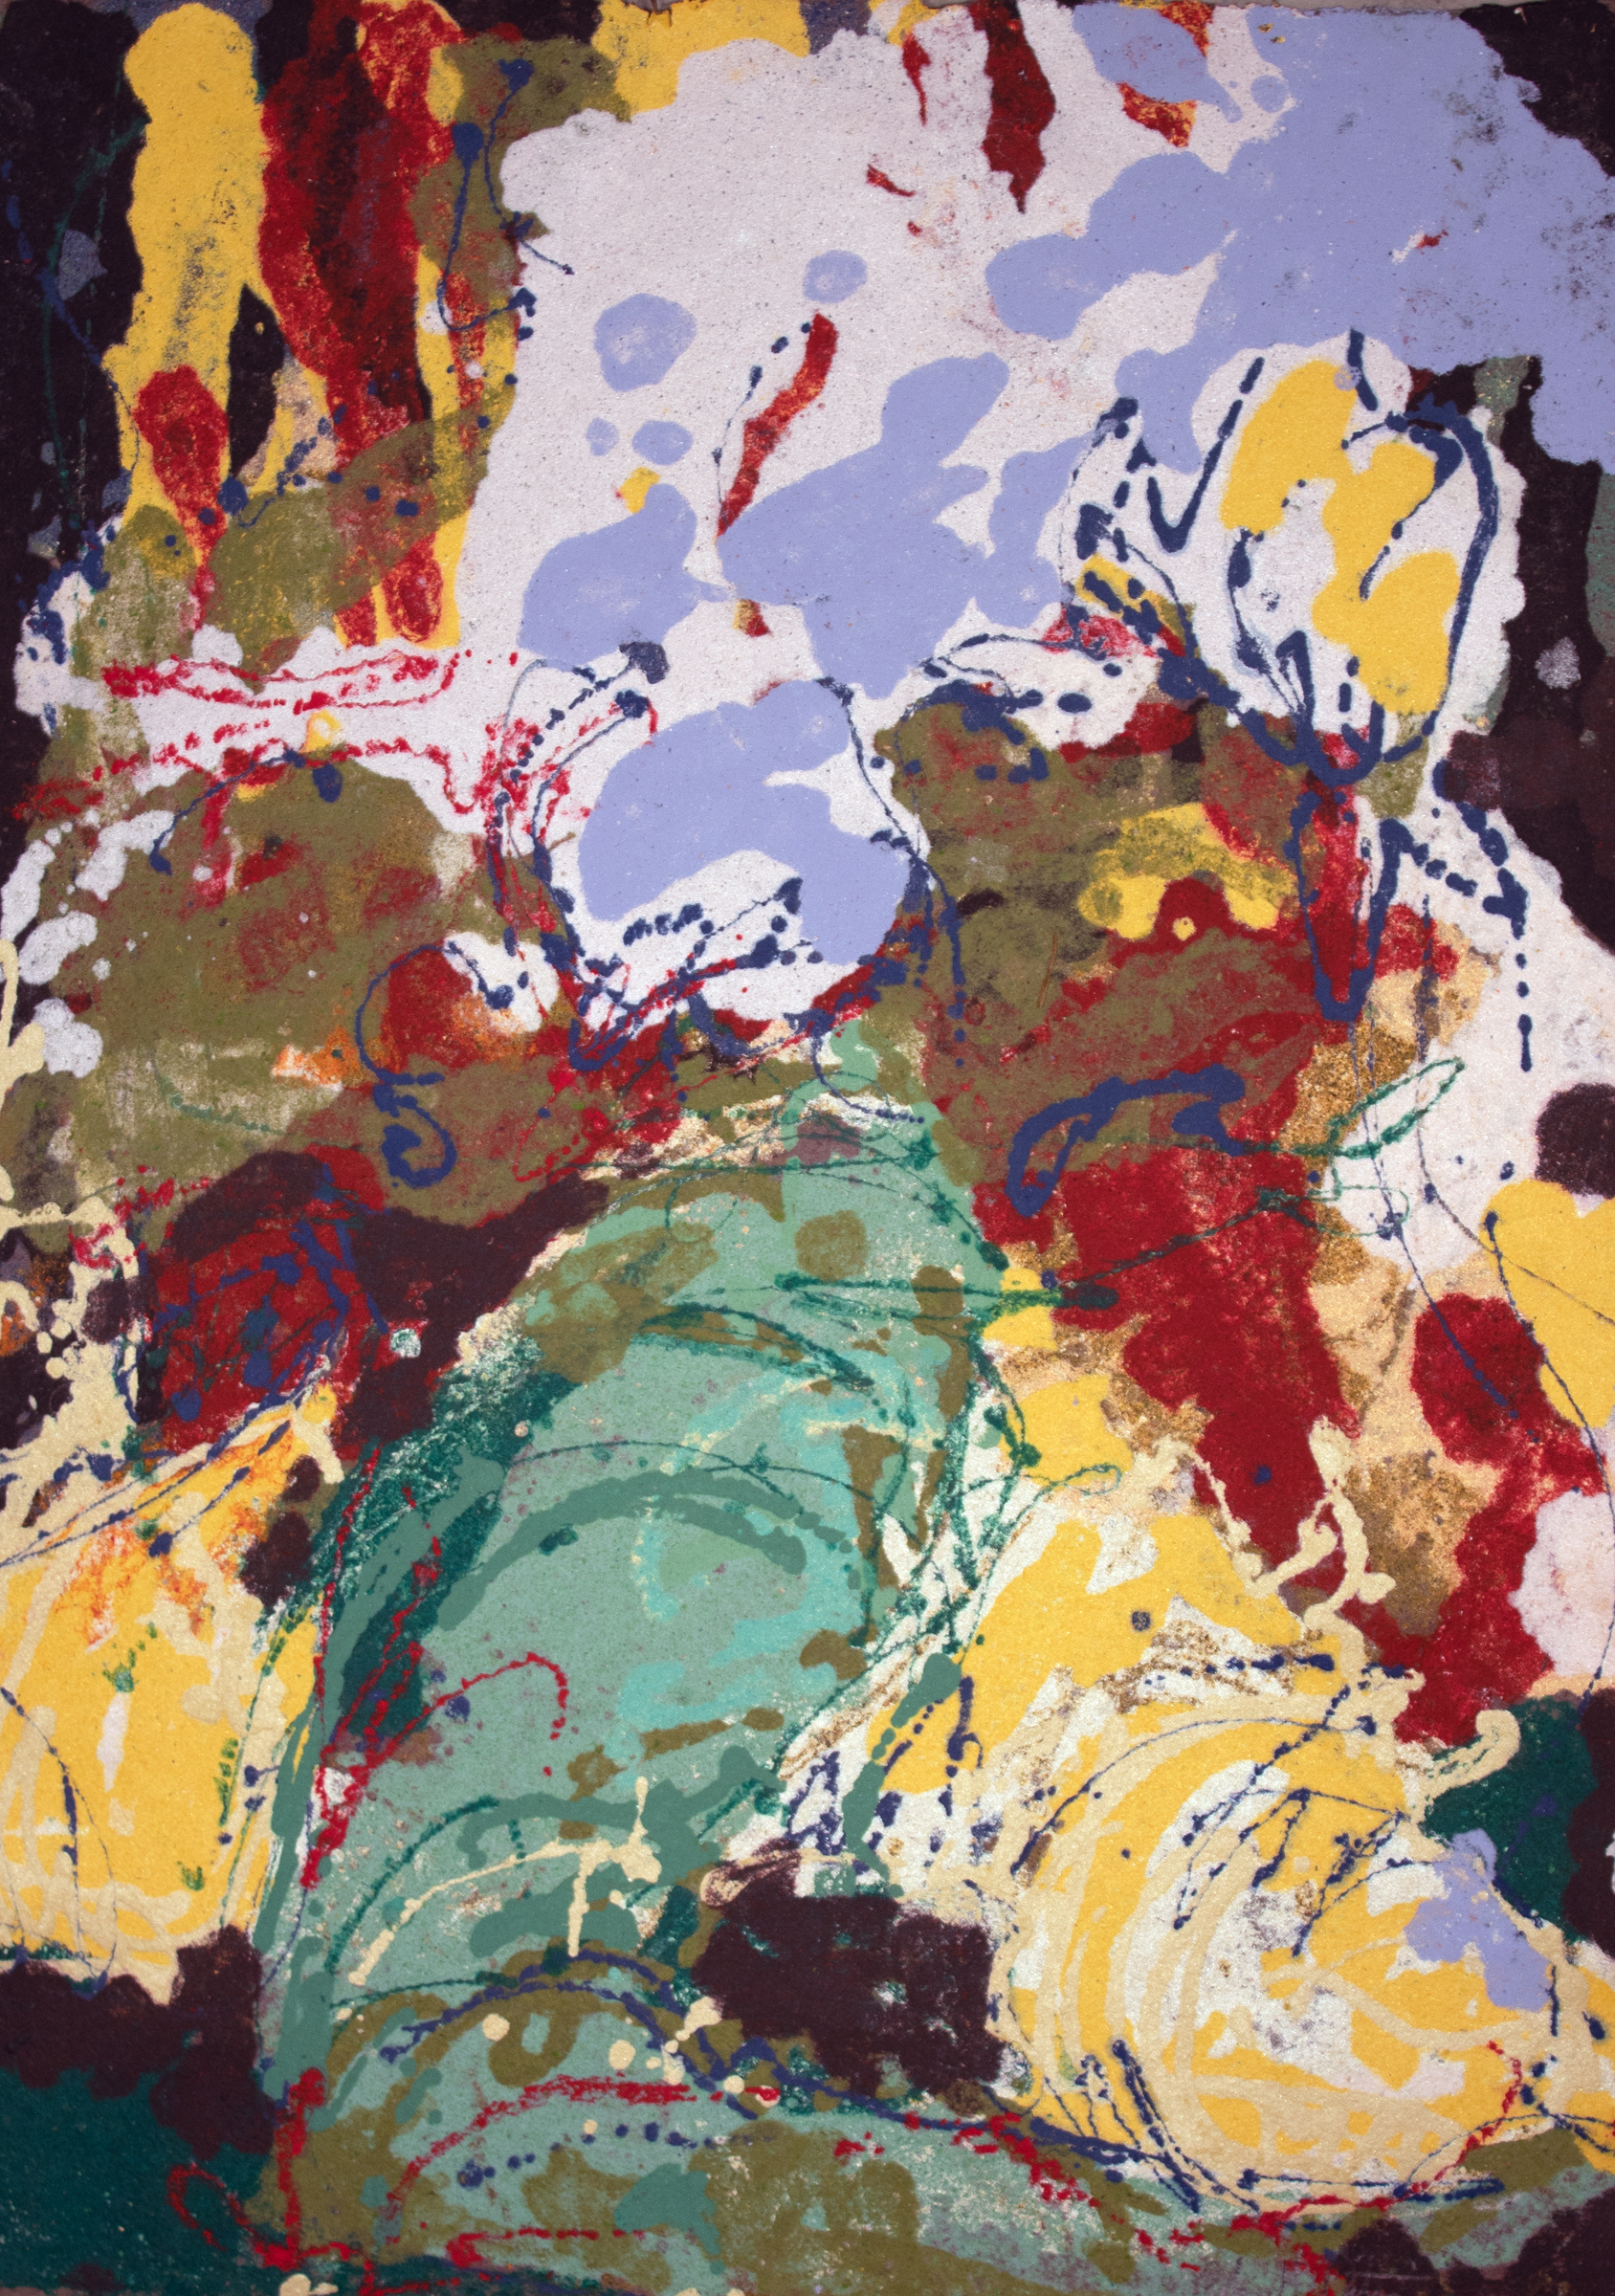 A mess of red, yellow, white, purple, teal, and gold paper pulp hatches from the center of this sheet, spilling out toward the edges.  Organic forms come to life in the myriad shapes of color.  The purple bursts toward the upper right.  The teal bends to support the yellow that weighs heavy on the lower-half of the page.  Gold and red span either side, while a white splotch ascends to the upper-middle section.  Small hints of dark purple pop it all forth from the background.